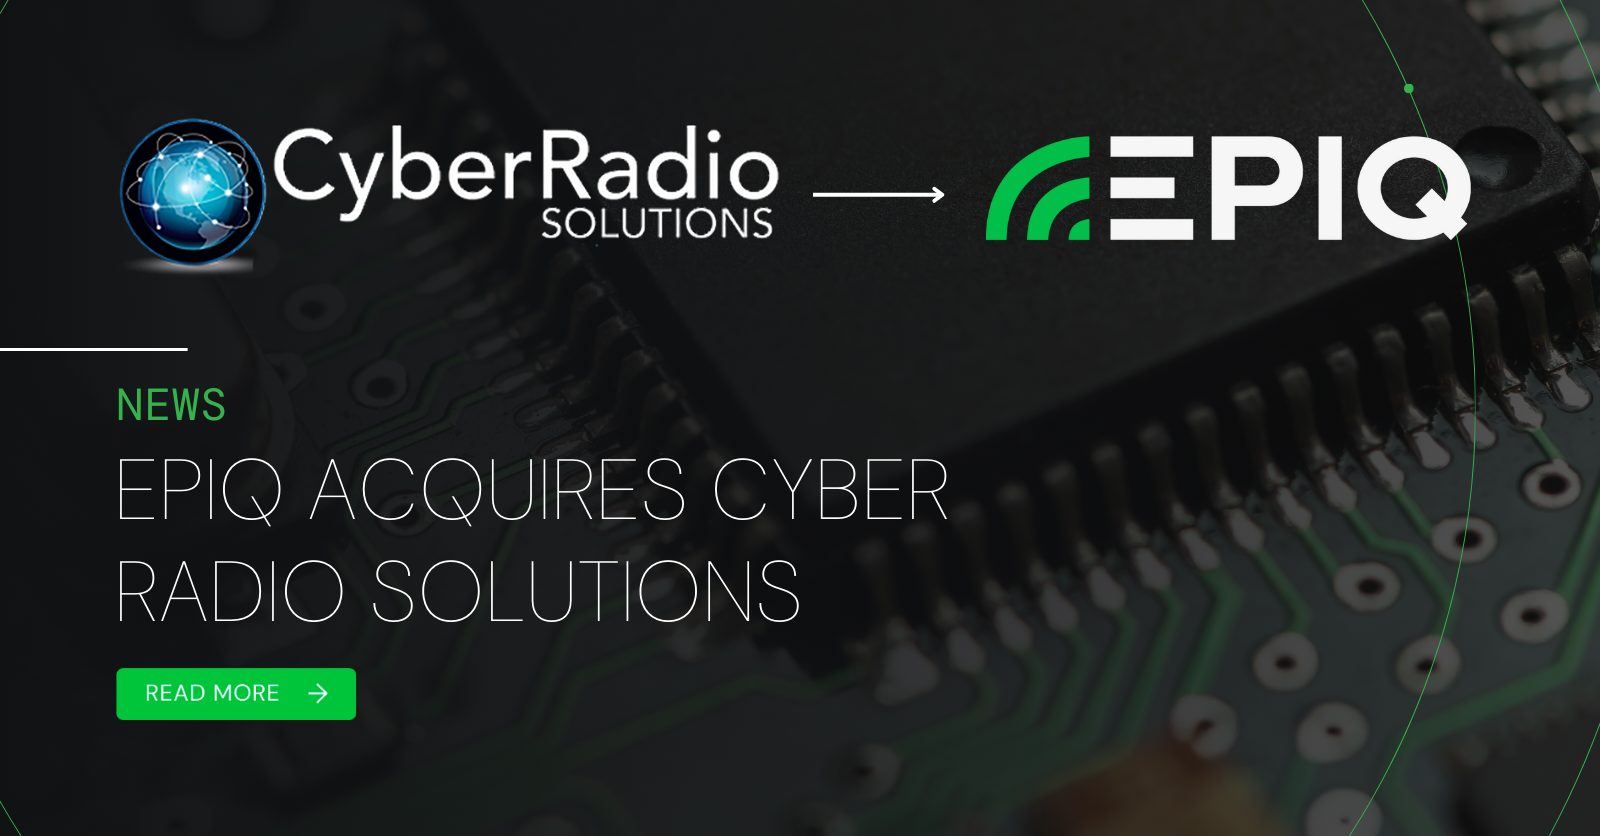 Welcoming CyberRadio Solutions to Team Epiq